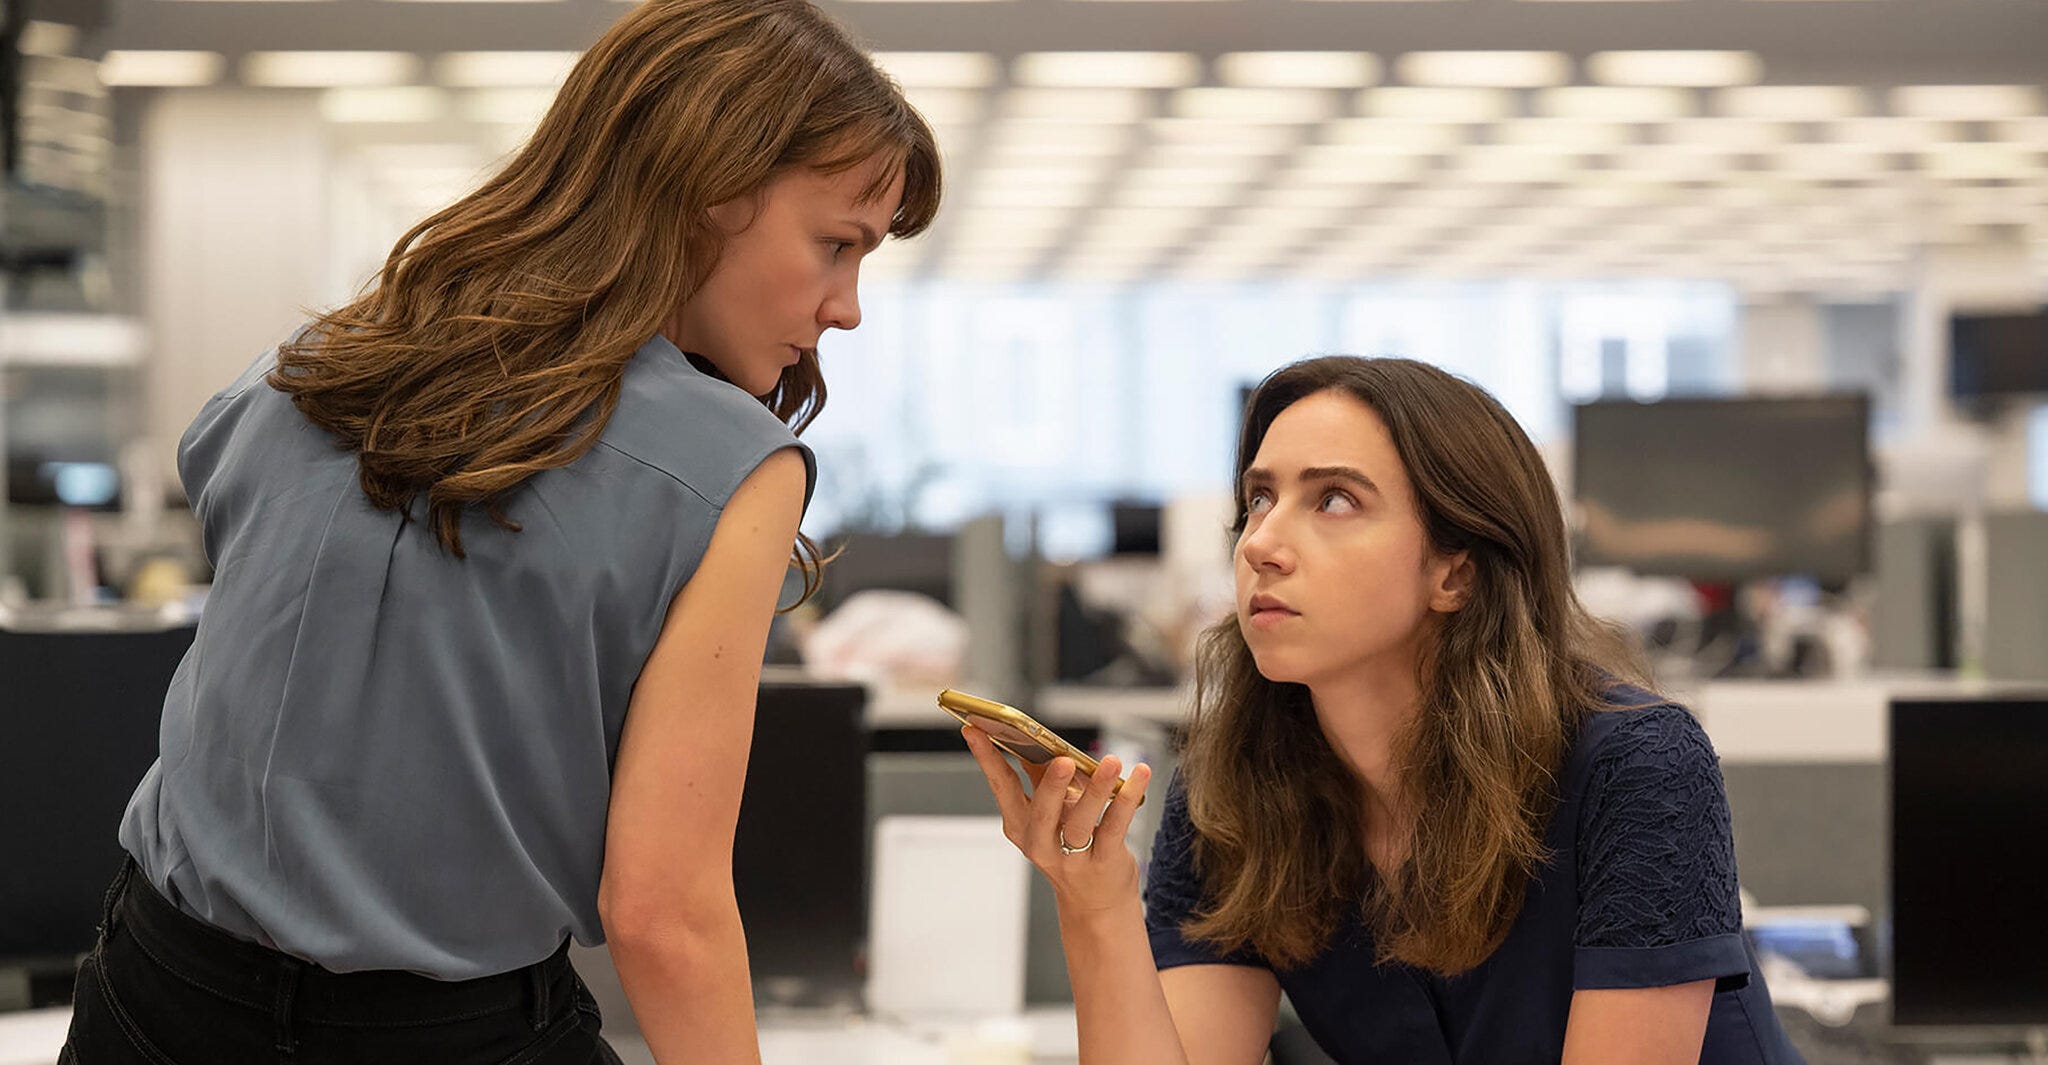 Carey Mulligan and Zoe Kazan as Meghan Twoey and Jodi Kantor taking a phone call with a source in the offices of the New York Times